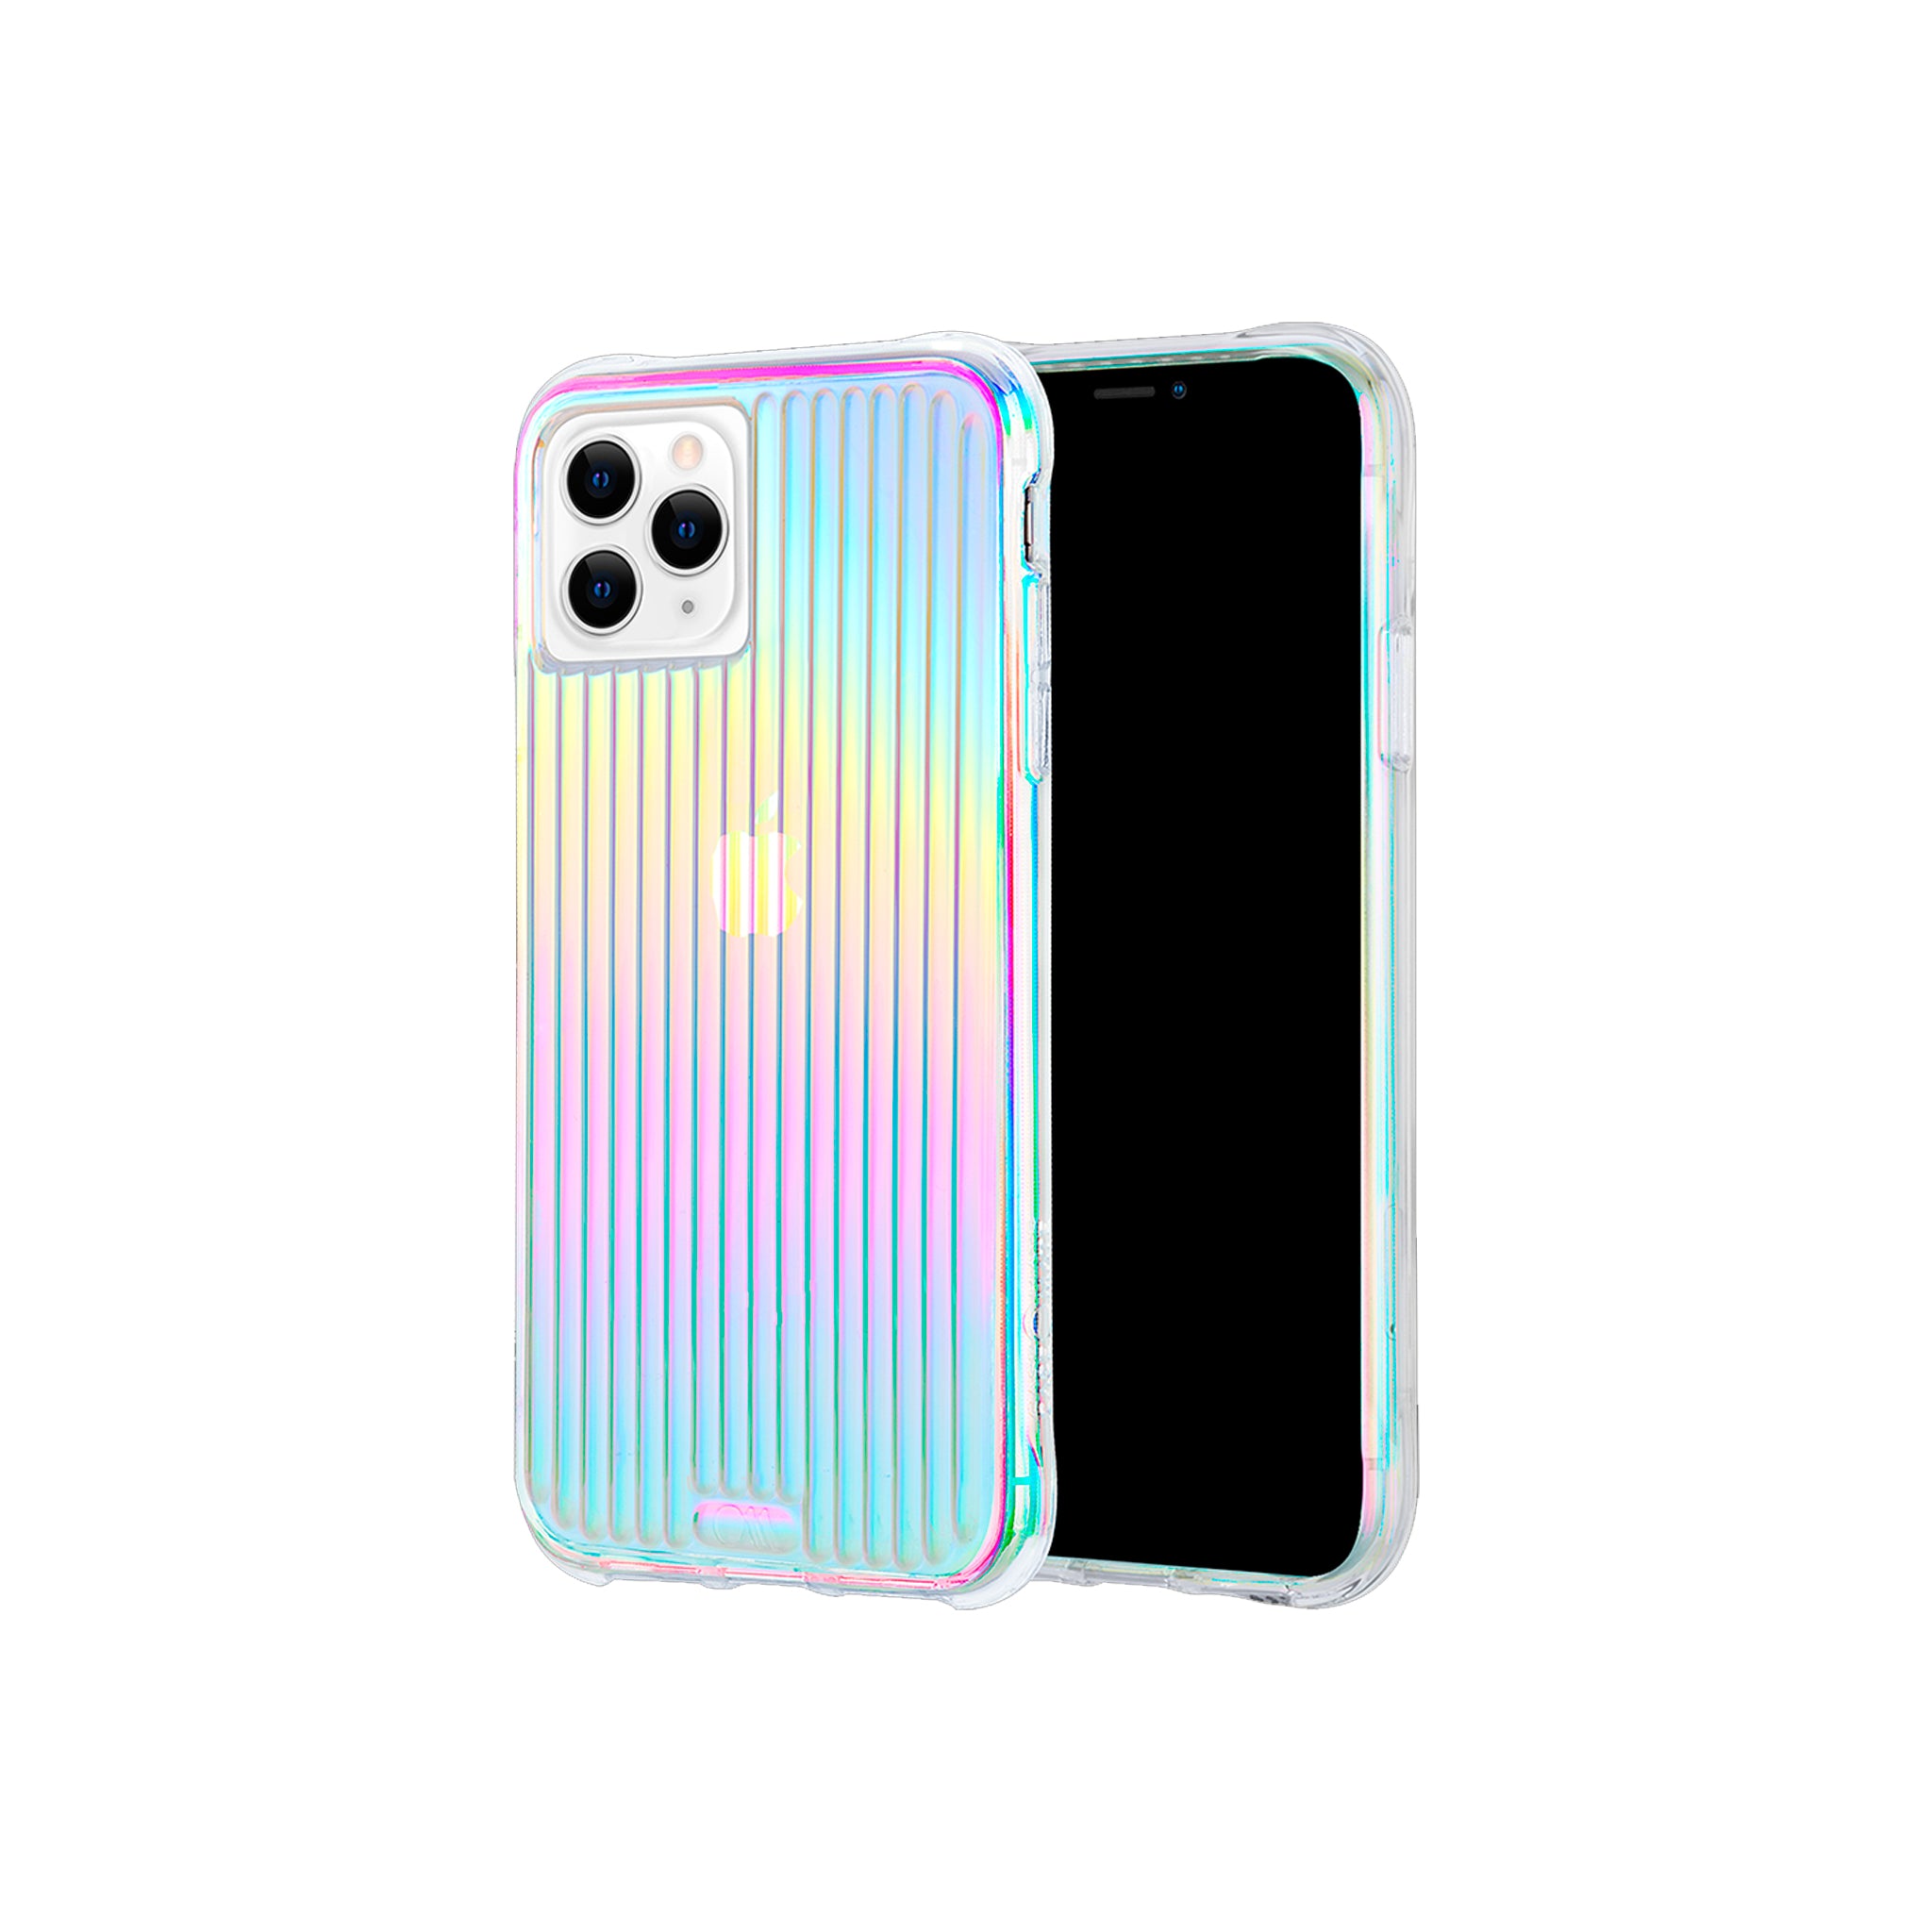 Case-mate - Tough Groove Case For Apple iPhone 11 Pro Max - Iridescent